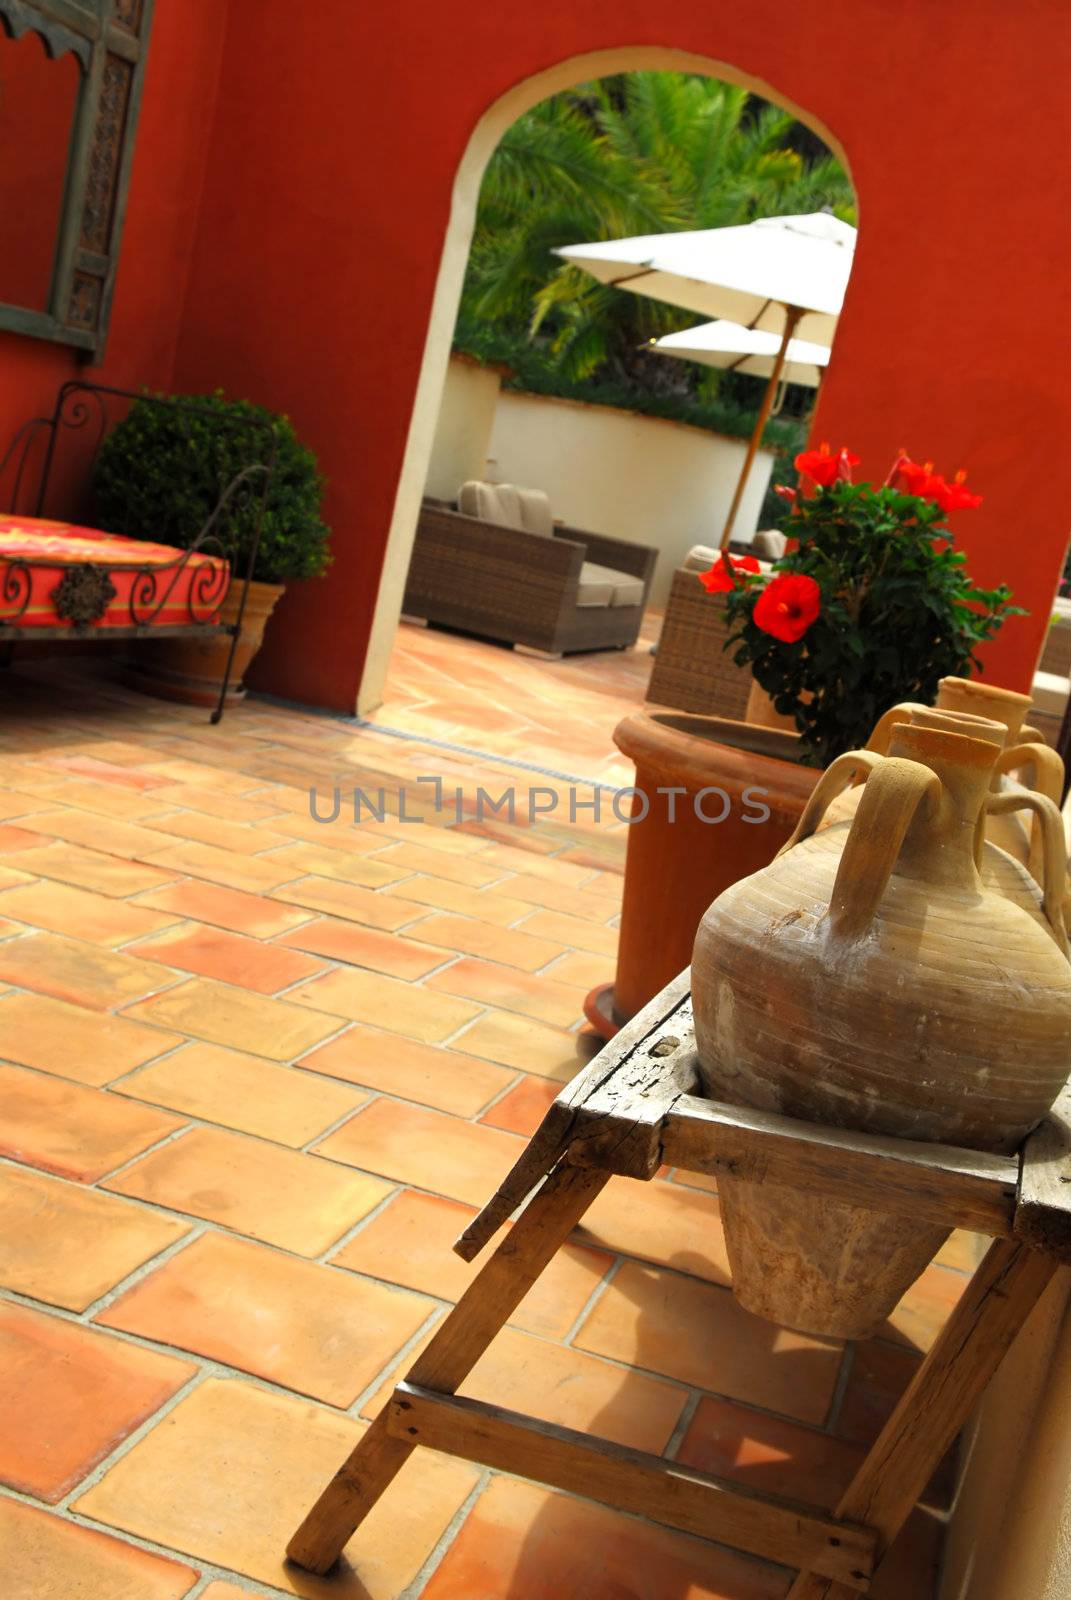 Courtyard of mediterranean villa in French Riviera. Shallow depths of filed, focus on amphoras.